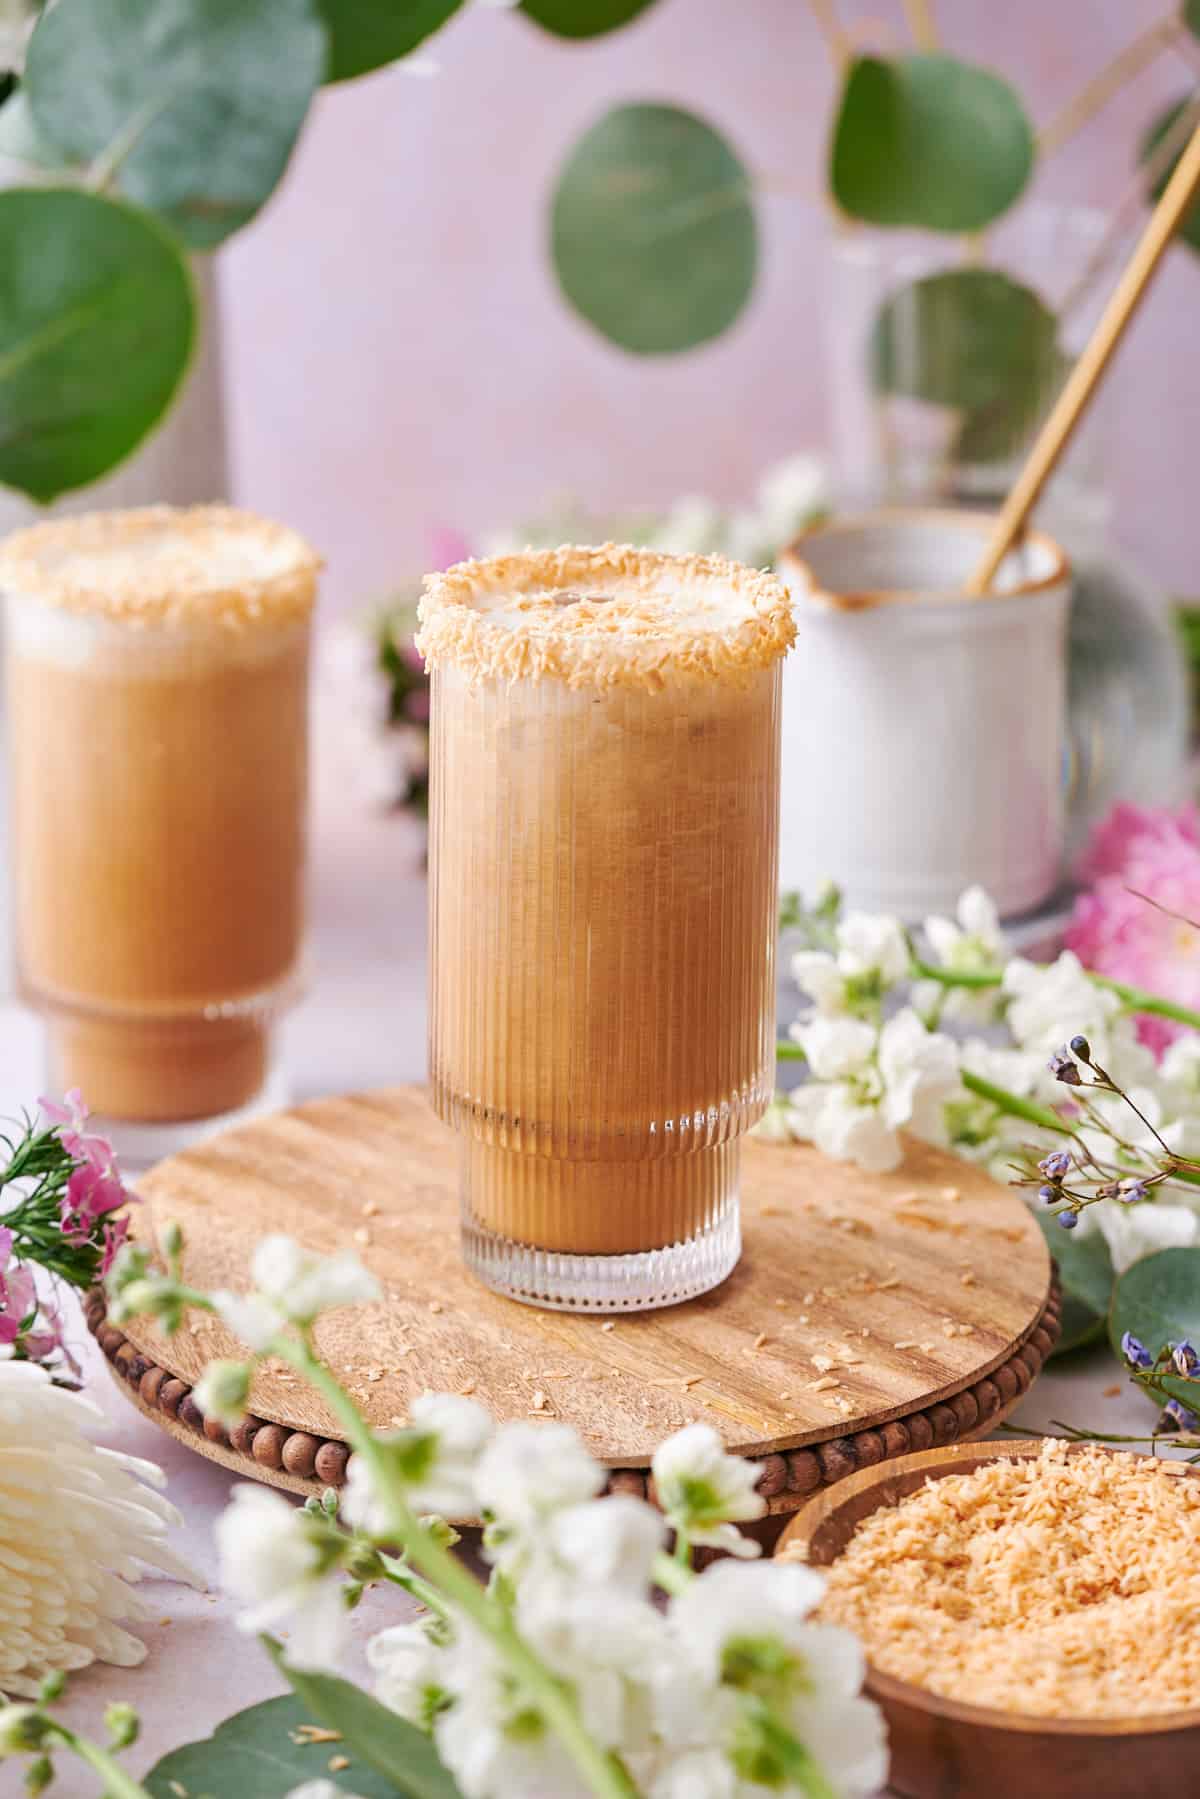 very pretty whimsical scene of coconut iced lattes surrounded by flowers and eucalyptus on a round wooden board.